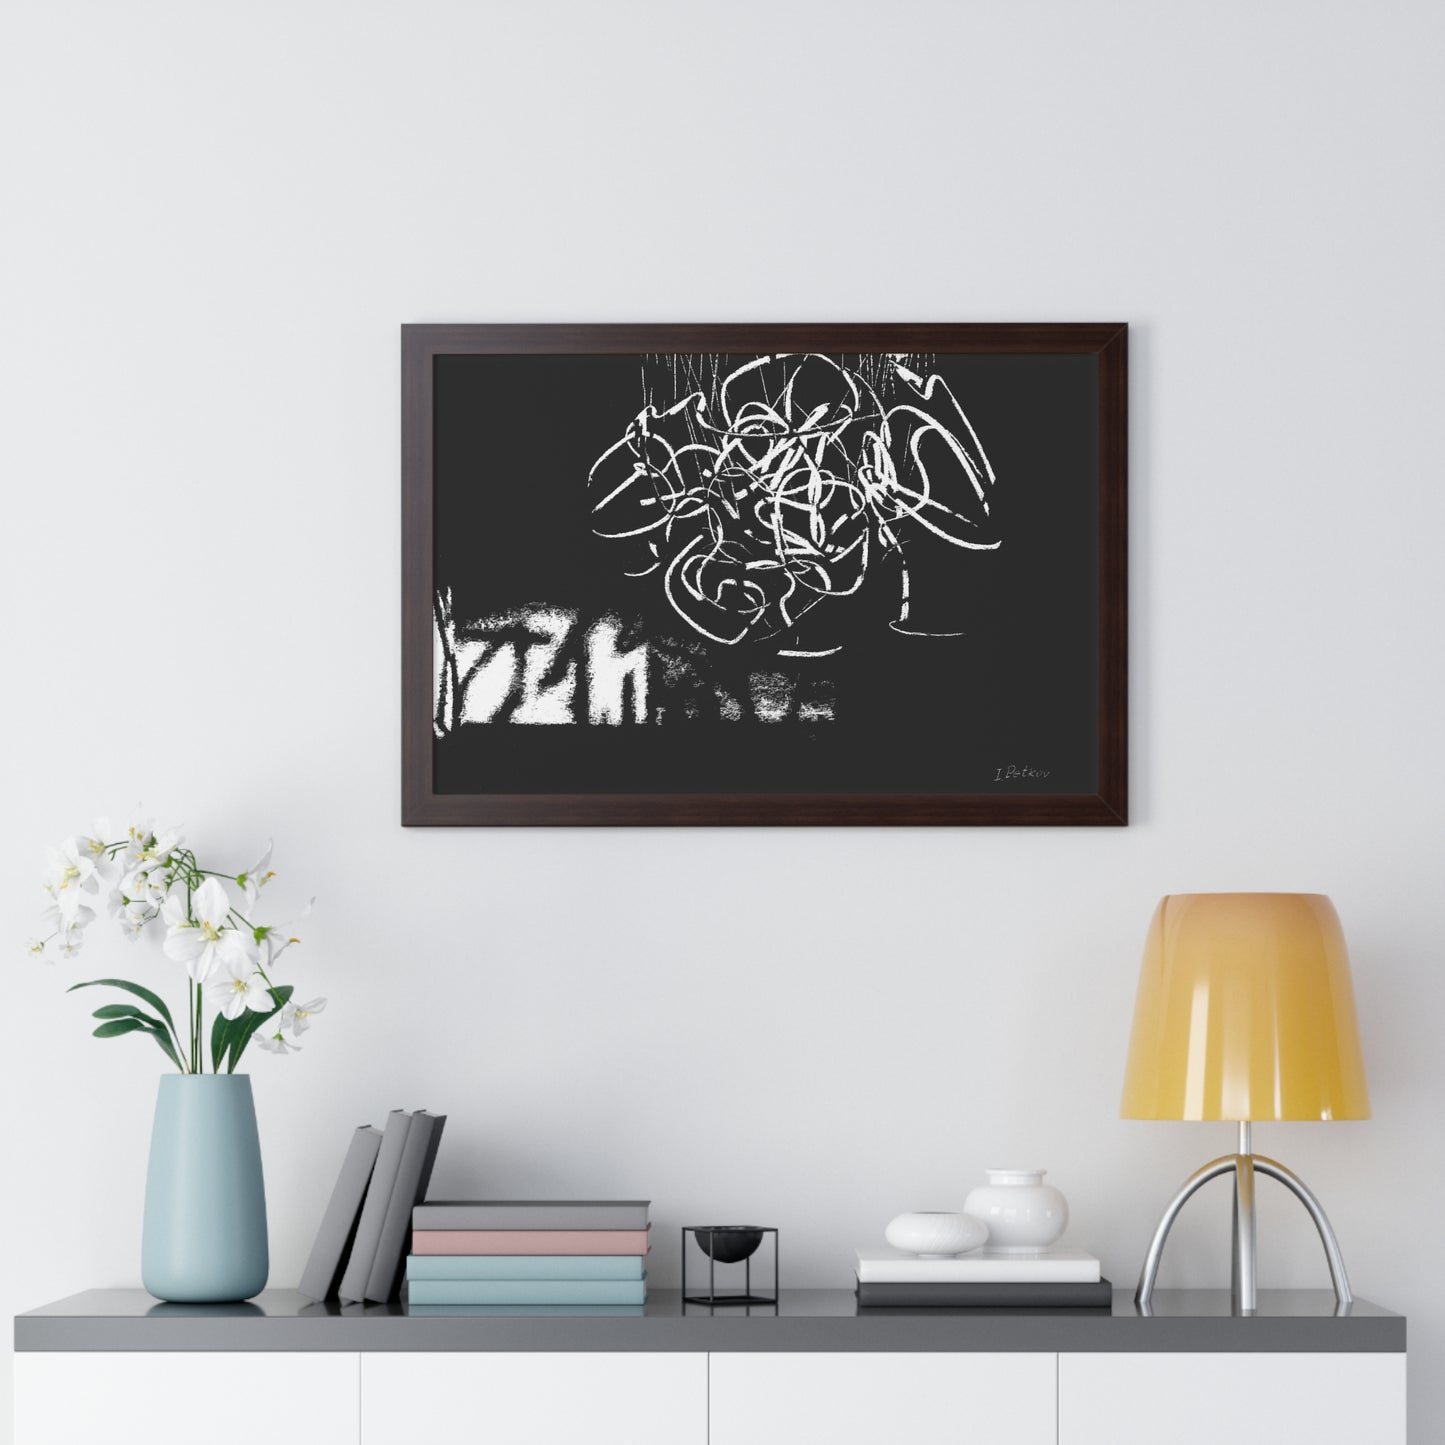 The Thing - Framed Poster Print